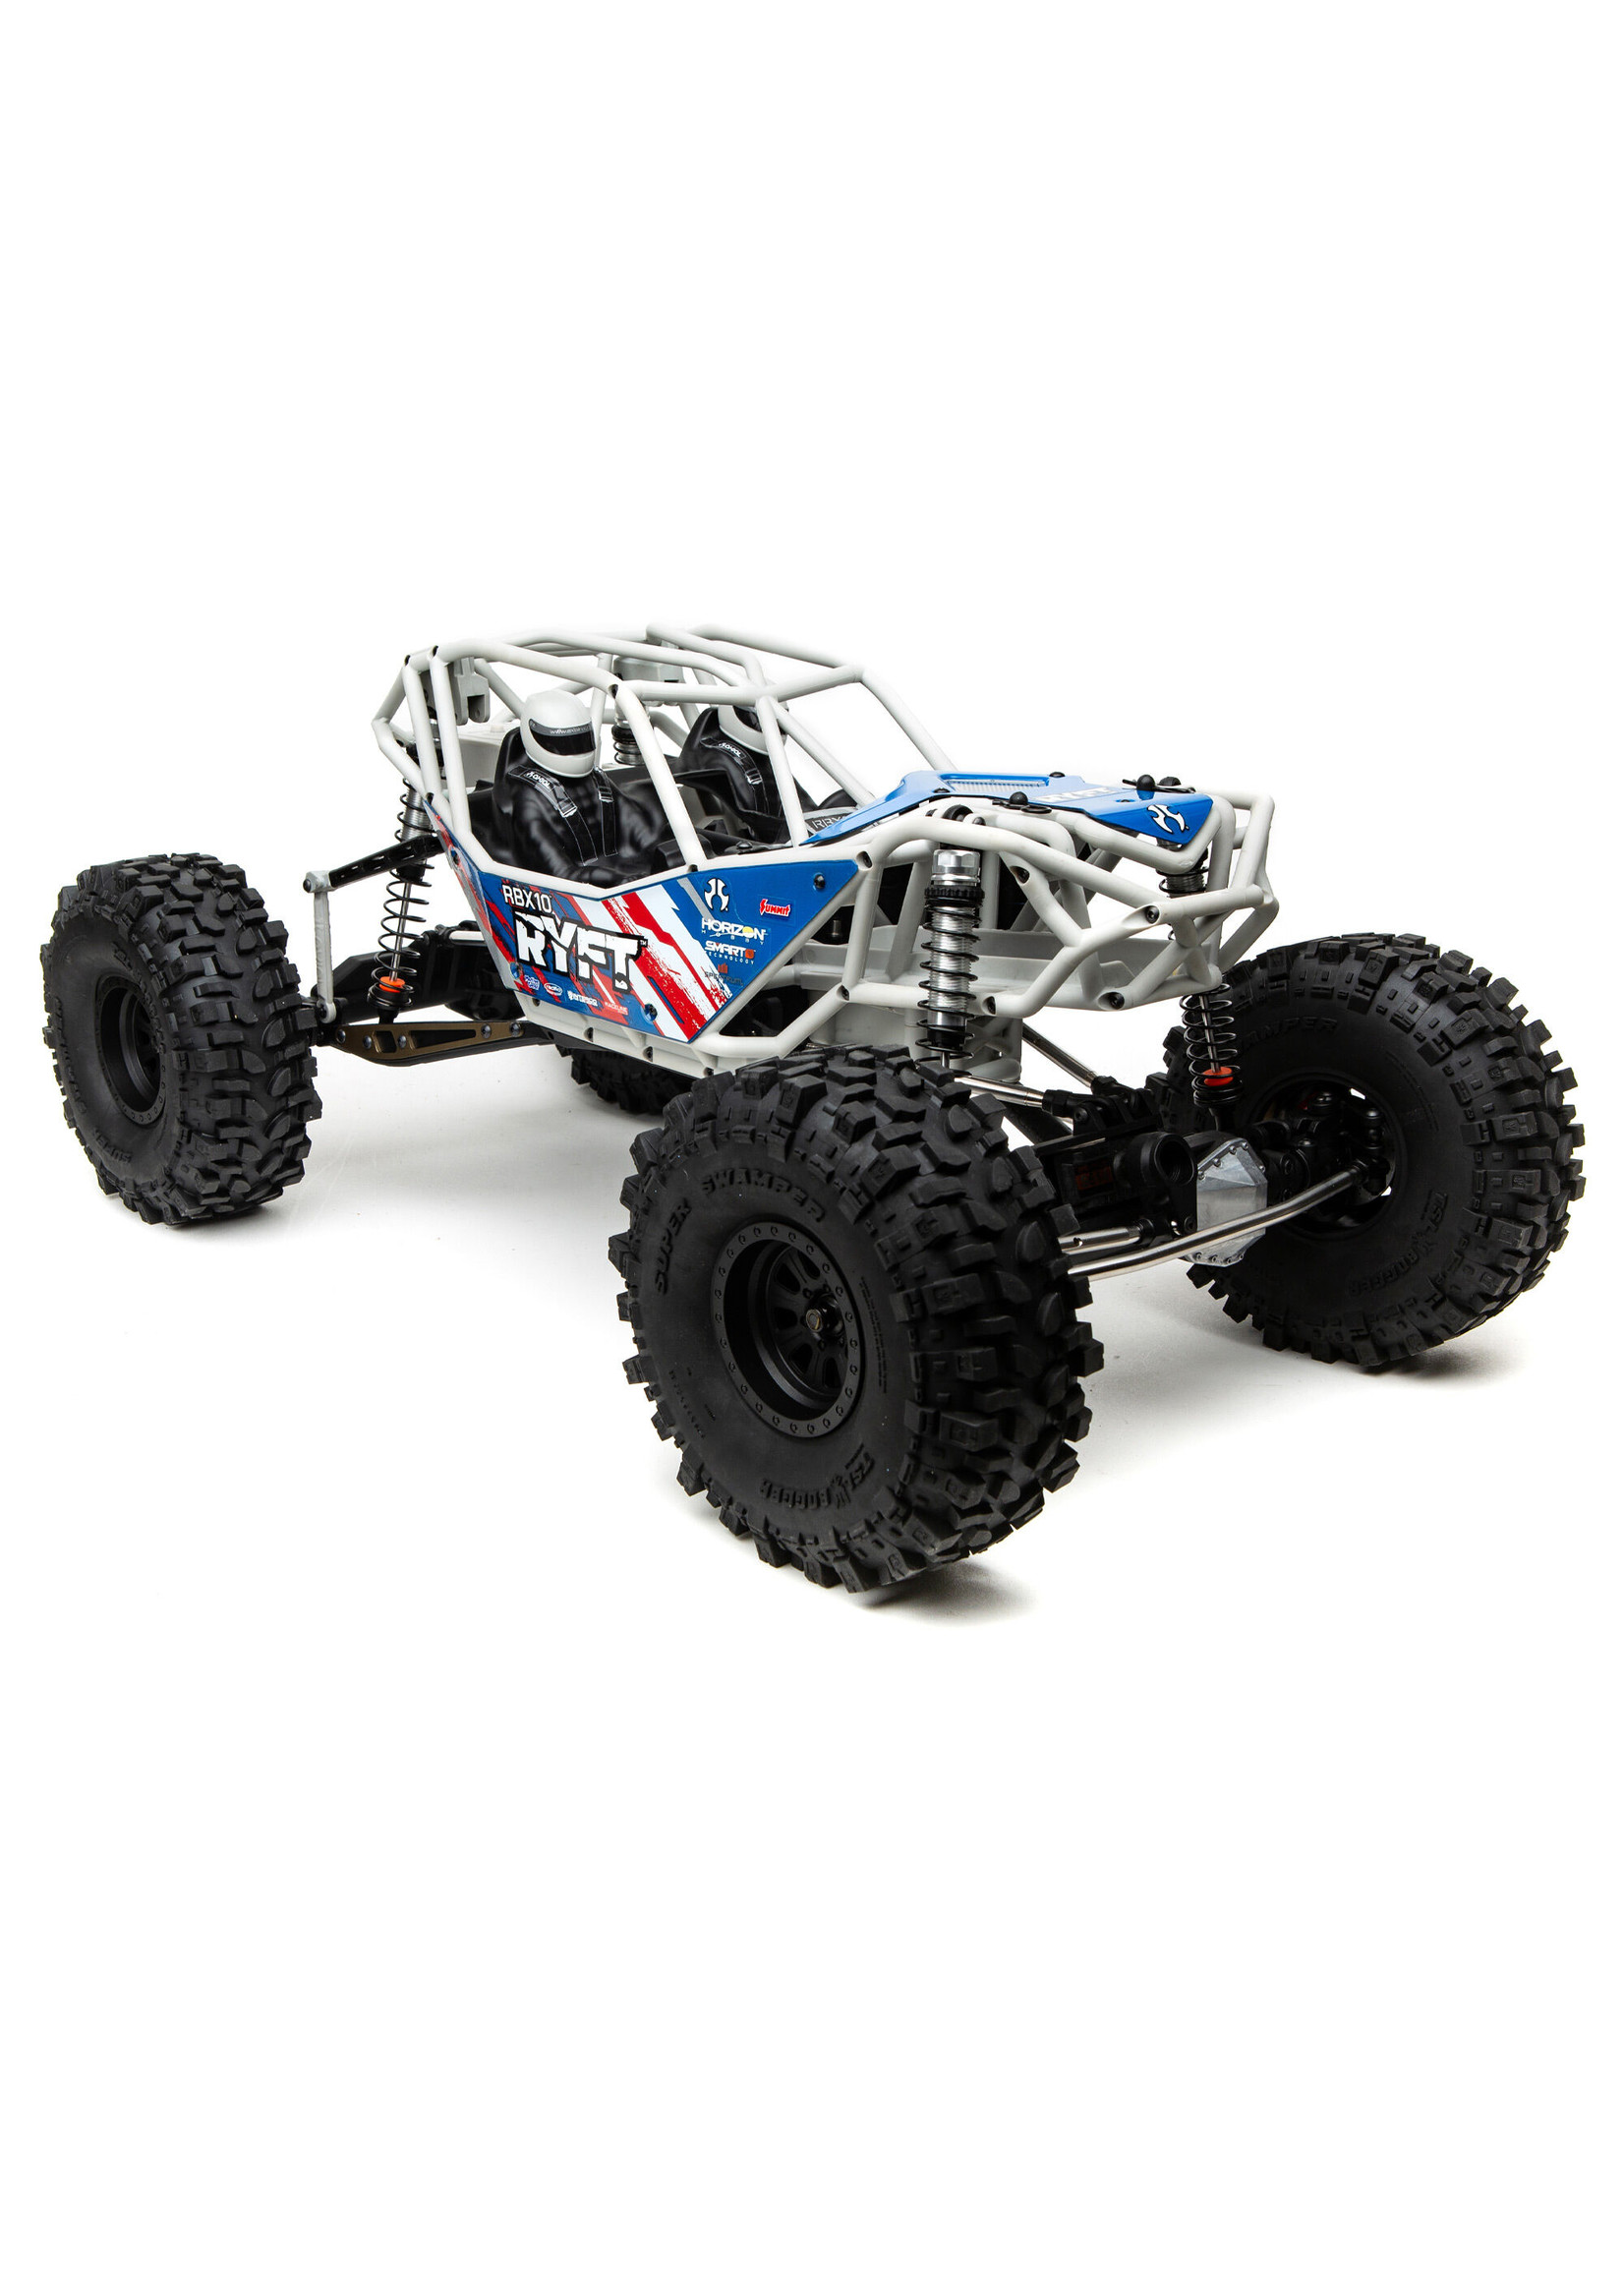 Axial 1/10 RBX10 Ryft 4WD Rock Bouncer Kit - Gray